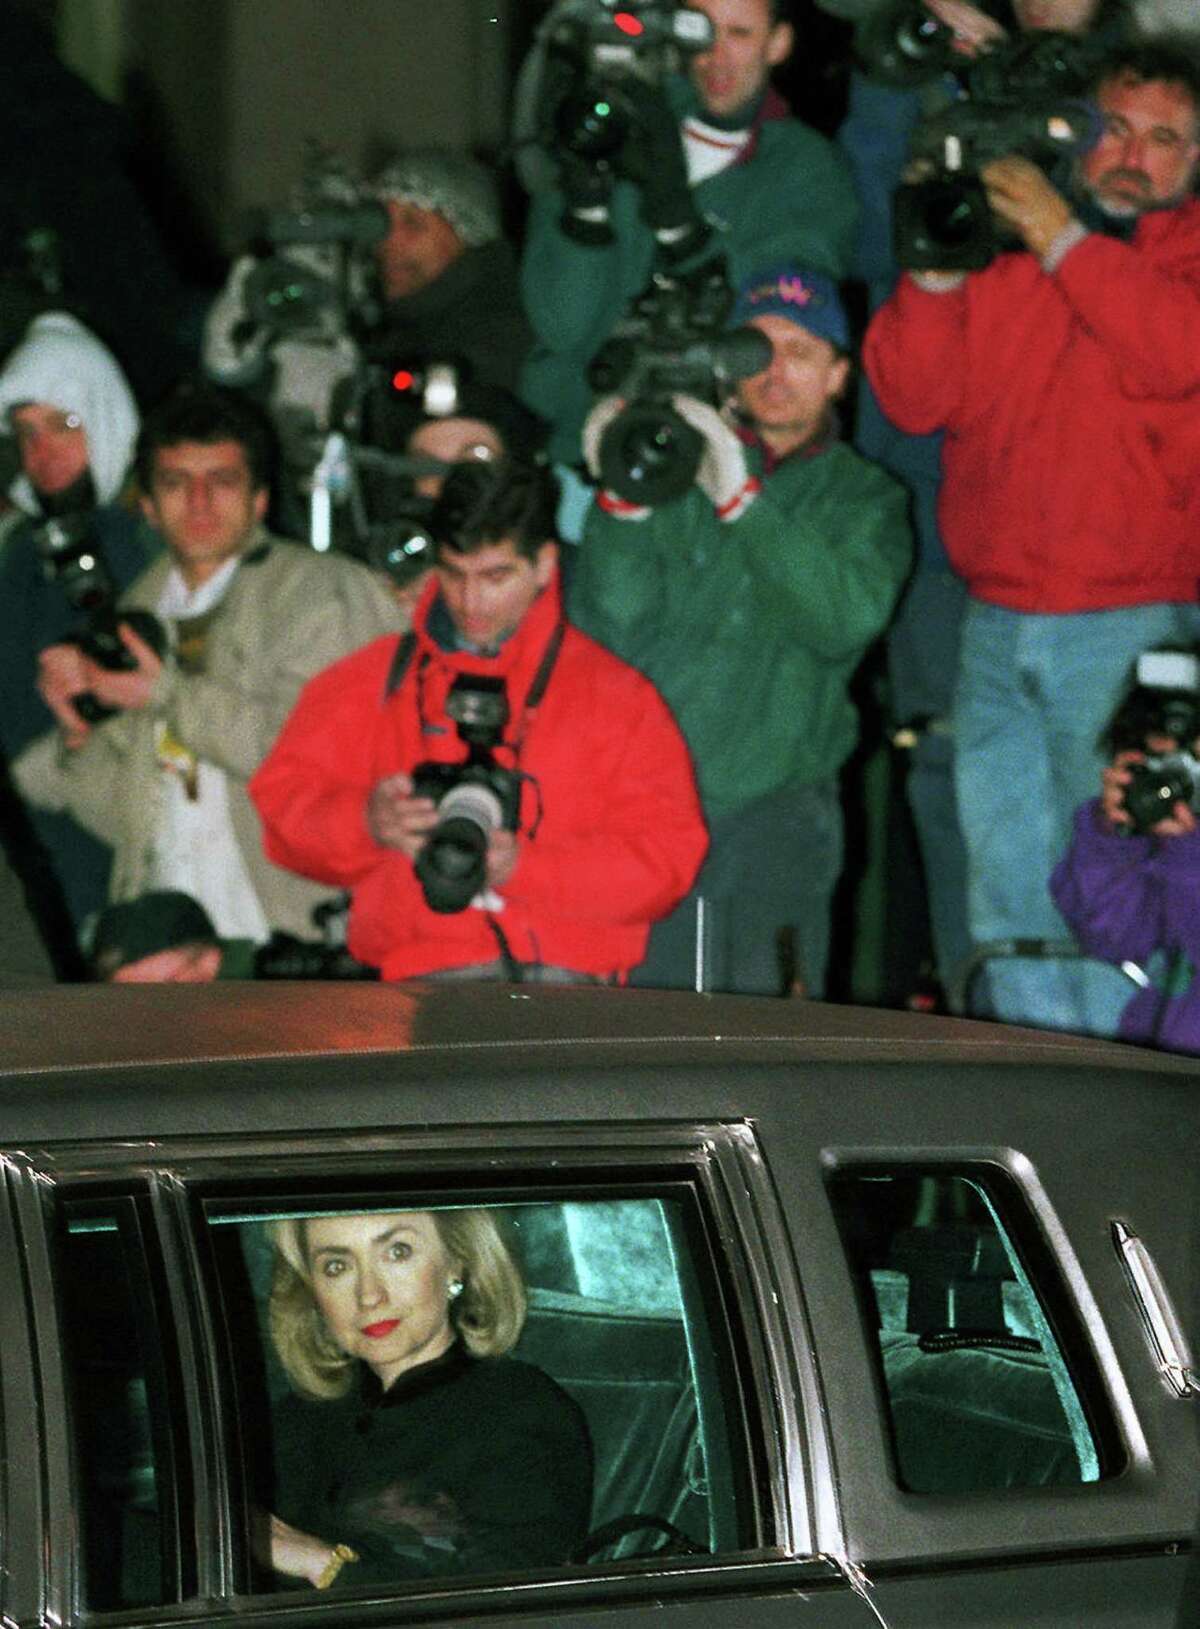 FILE - In this Jan. 26, 1996 file photo, then-first lady Hillary Rodham Clinton leaves U.S. District Court in Washington for the White House after testifying about four hours in secret to a grand jury investigating Whitewater. Once again, Hillary Rodham Clinton did it her way, and it could cost her. Clintonís decision to eschew government email and use her own private server as secretary of state is raising questions about secrecy, security and the law _ including whether she might have deleted important messages tapped into her ubiquitous Blackberry instead of preserving them for public scrutiny and history. At the least, the controversy is a bump on her unprecedented path from first lady to presumed presidential contender. (AP Photo/Mark Wilson, File)